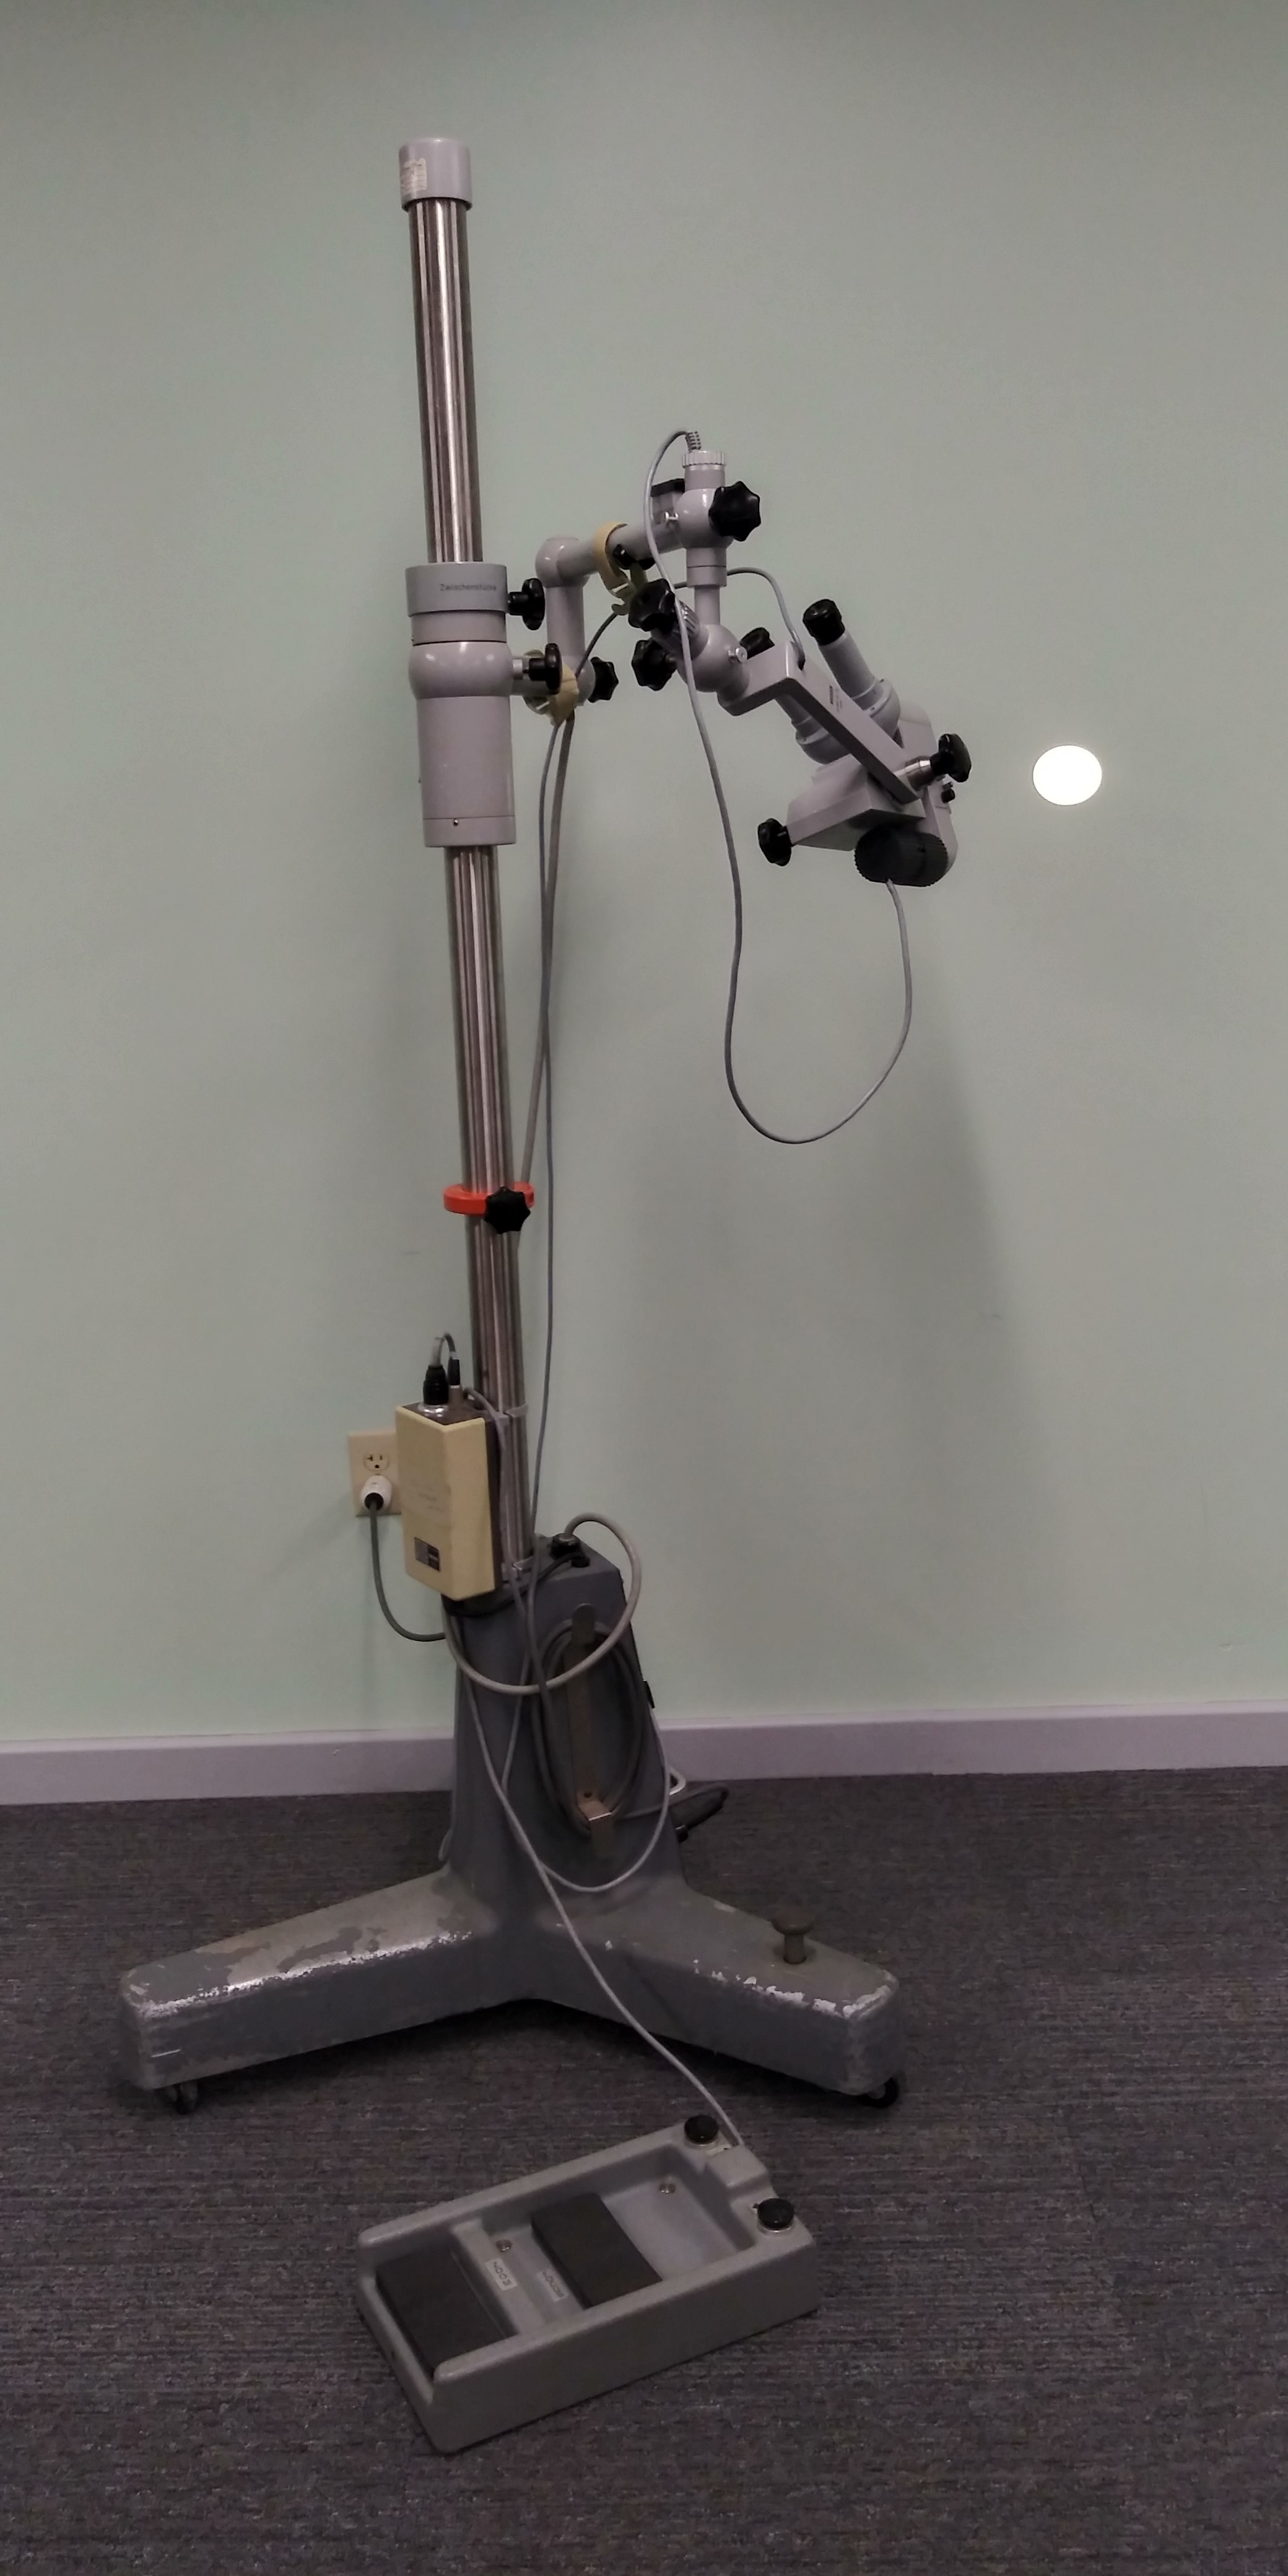 Zeiss OPMI 6-S Surgical Microscope